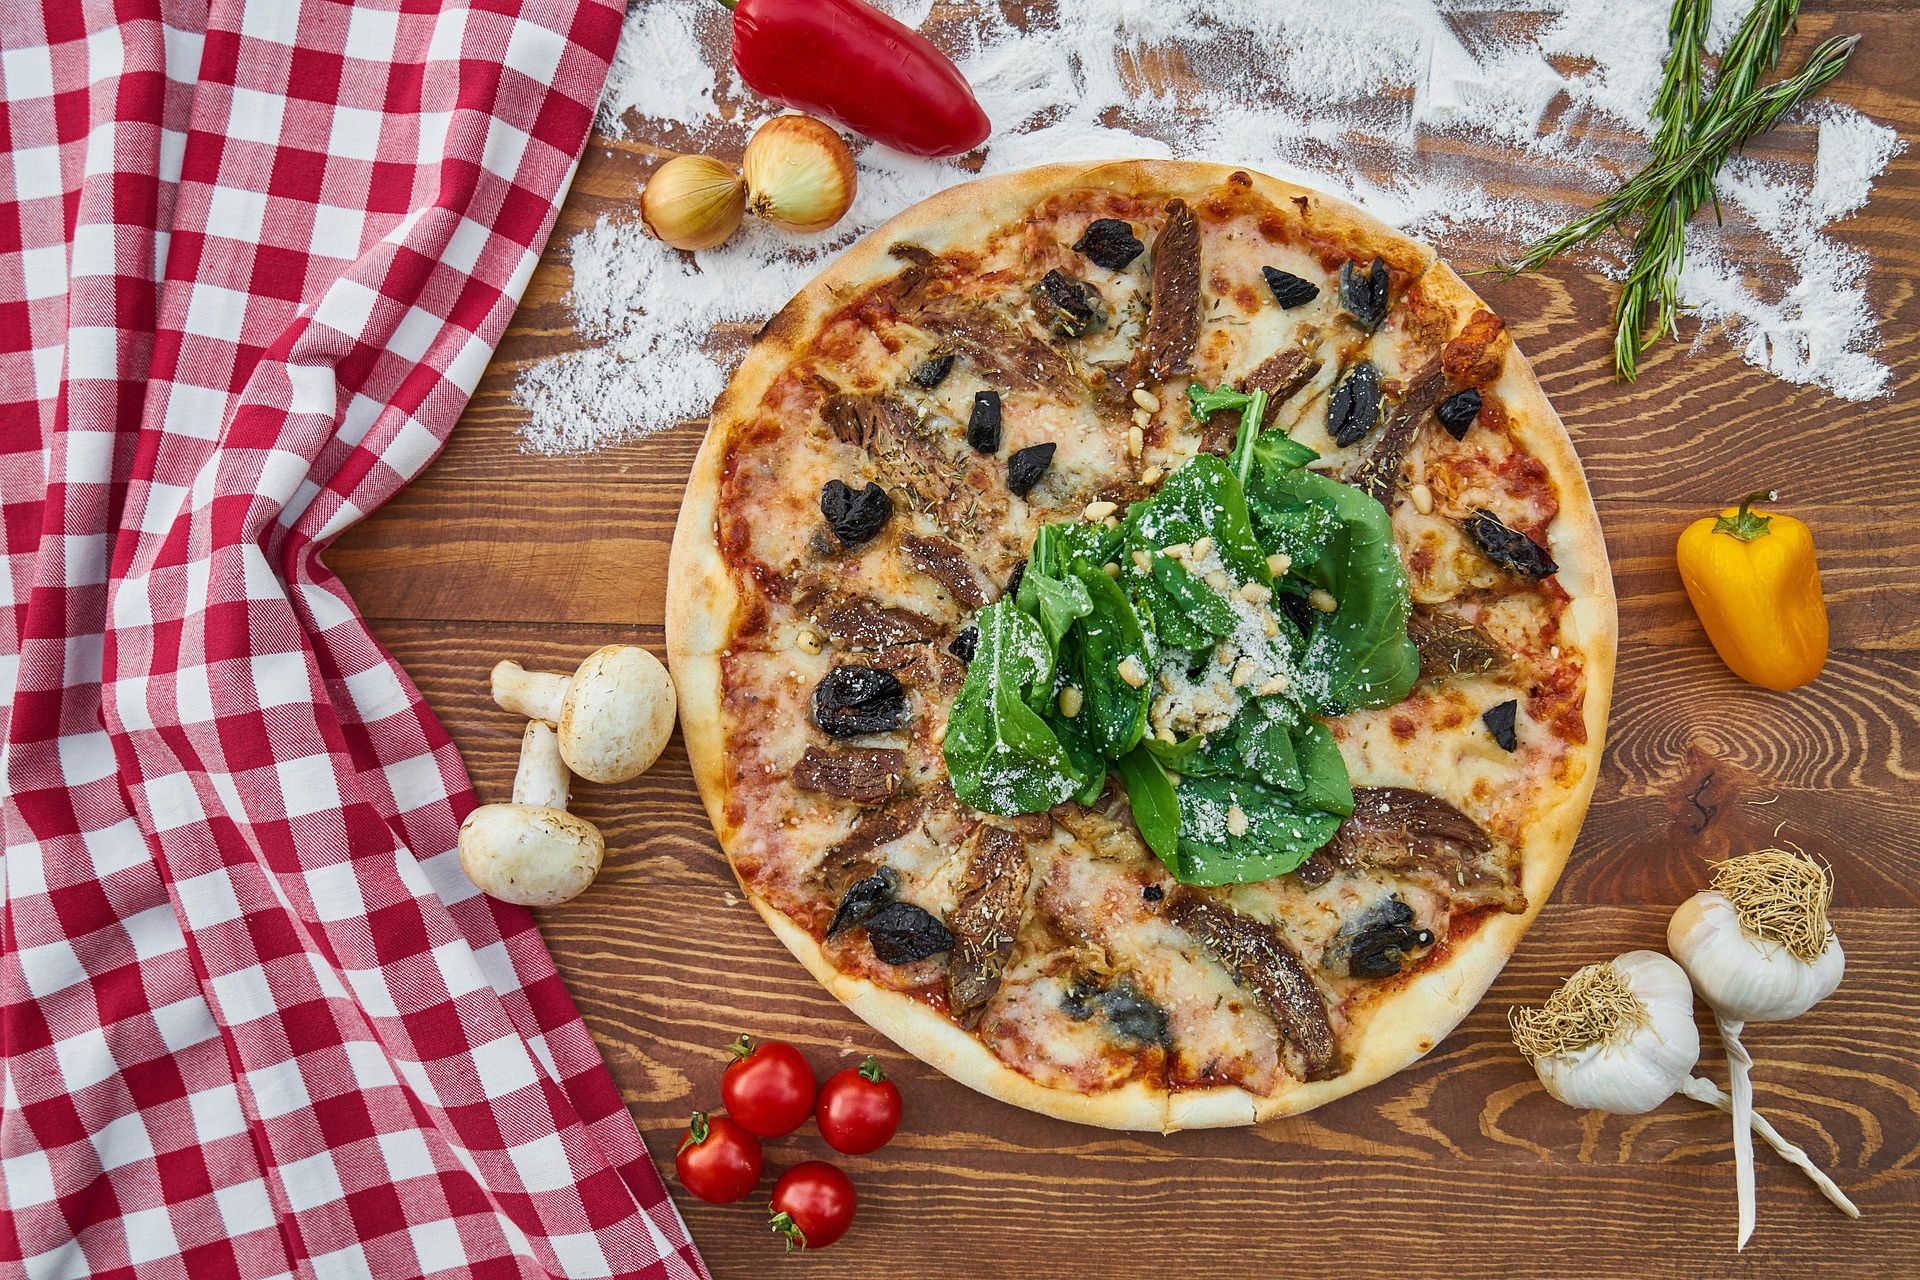 Pizza Food Vegetables Garlic Tomatoes Mushroom Red Pepper Olives Rosemary Cheese Flour Wooden Surfac 1920x1280